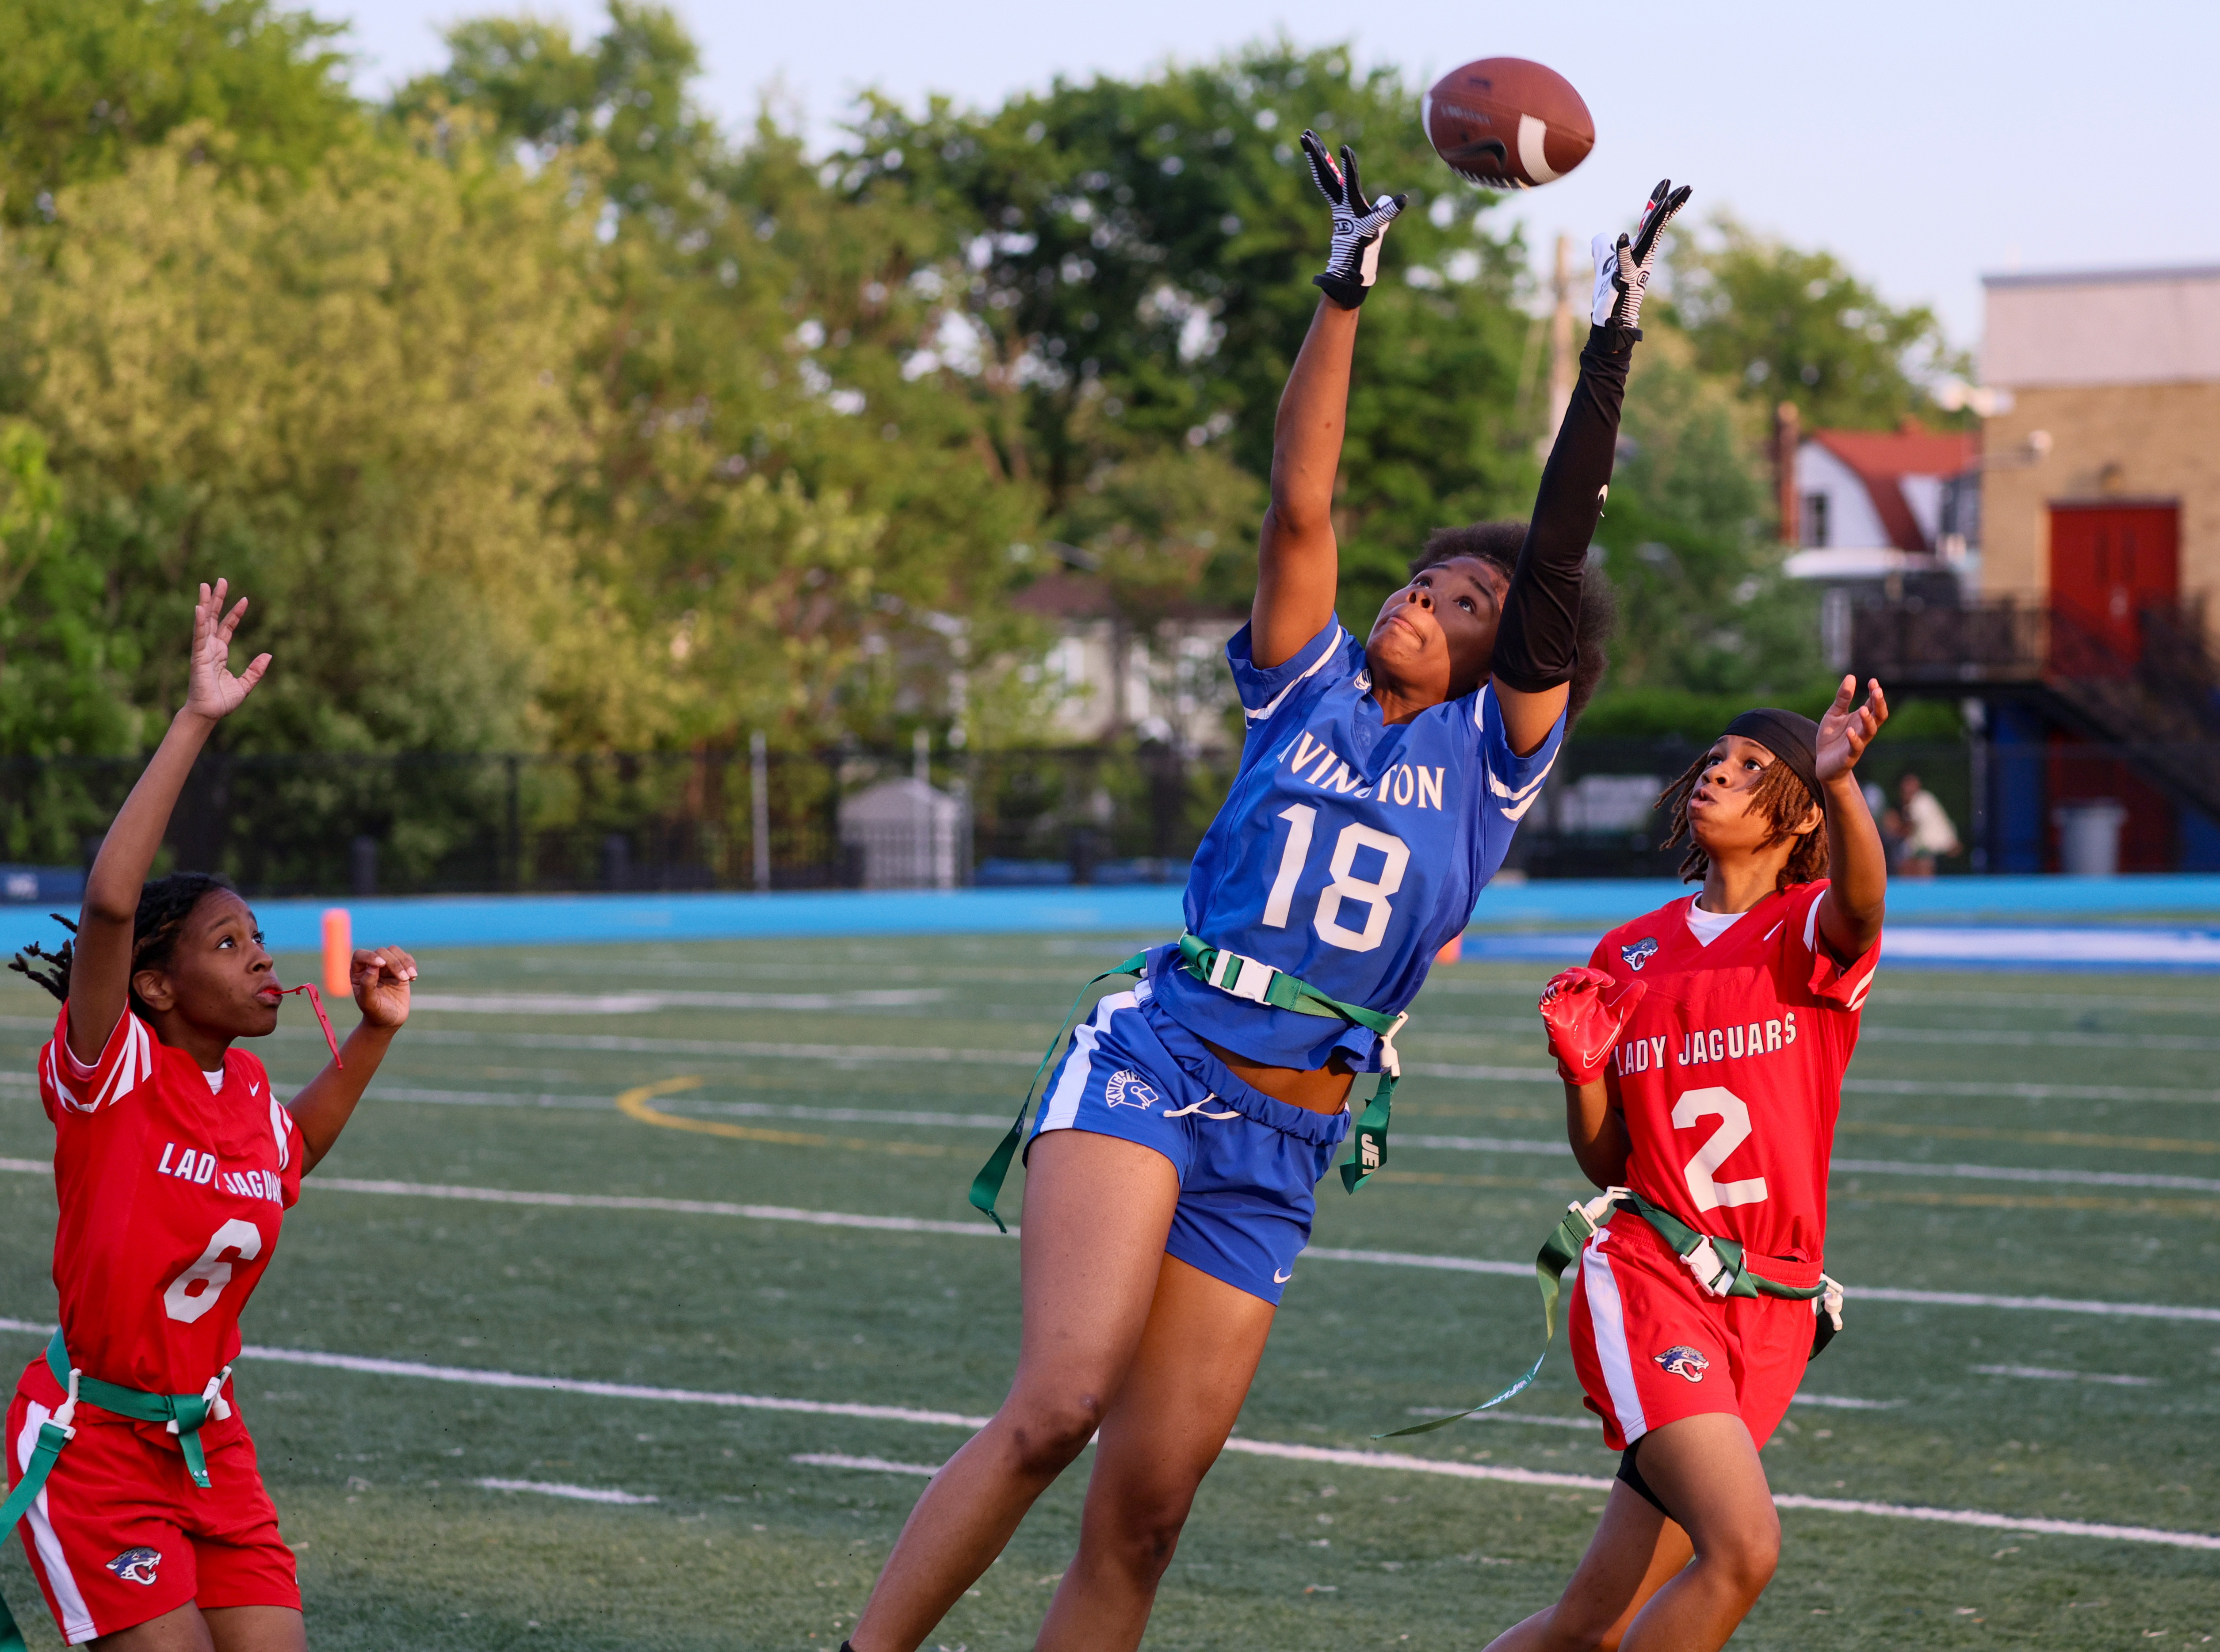 New York Jets expanding Girls' Flag Football in New Jersey and